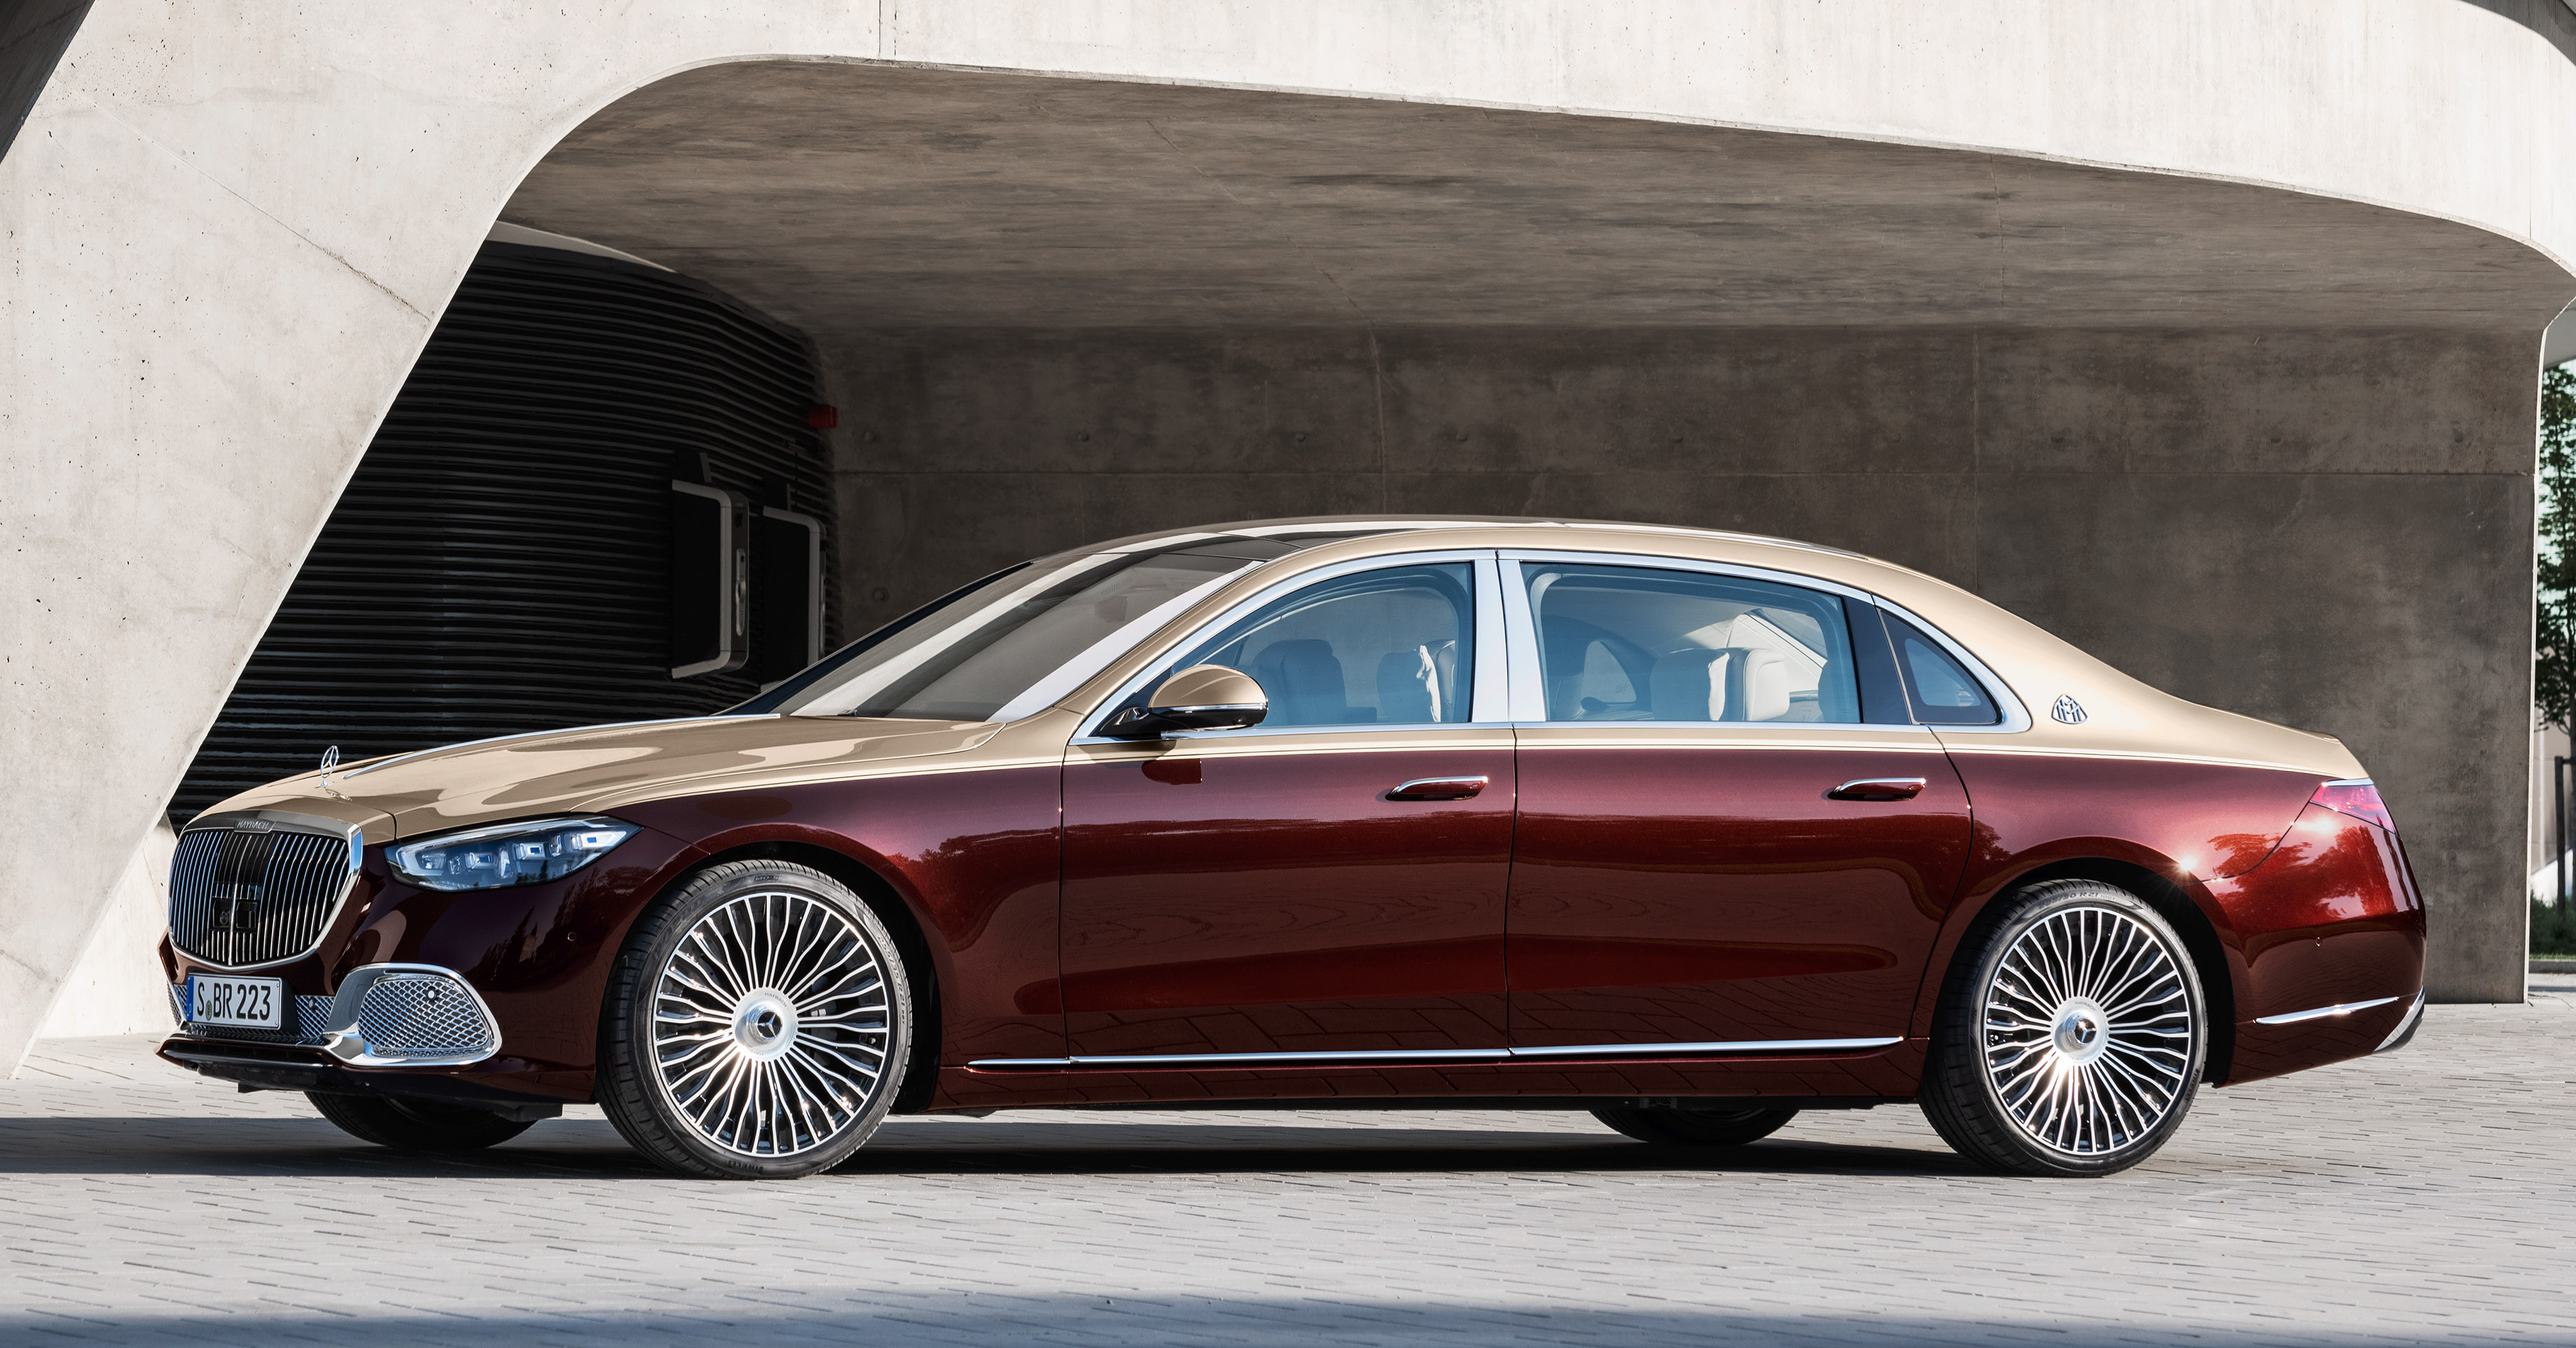 Mercedes benz maybach 600. Мерседес Бенц Майбах s600. Майбах-Мерседес s600 2022. Mercedes Benz Maybach 2022. Мерседес Майбах s класс 2022.